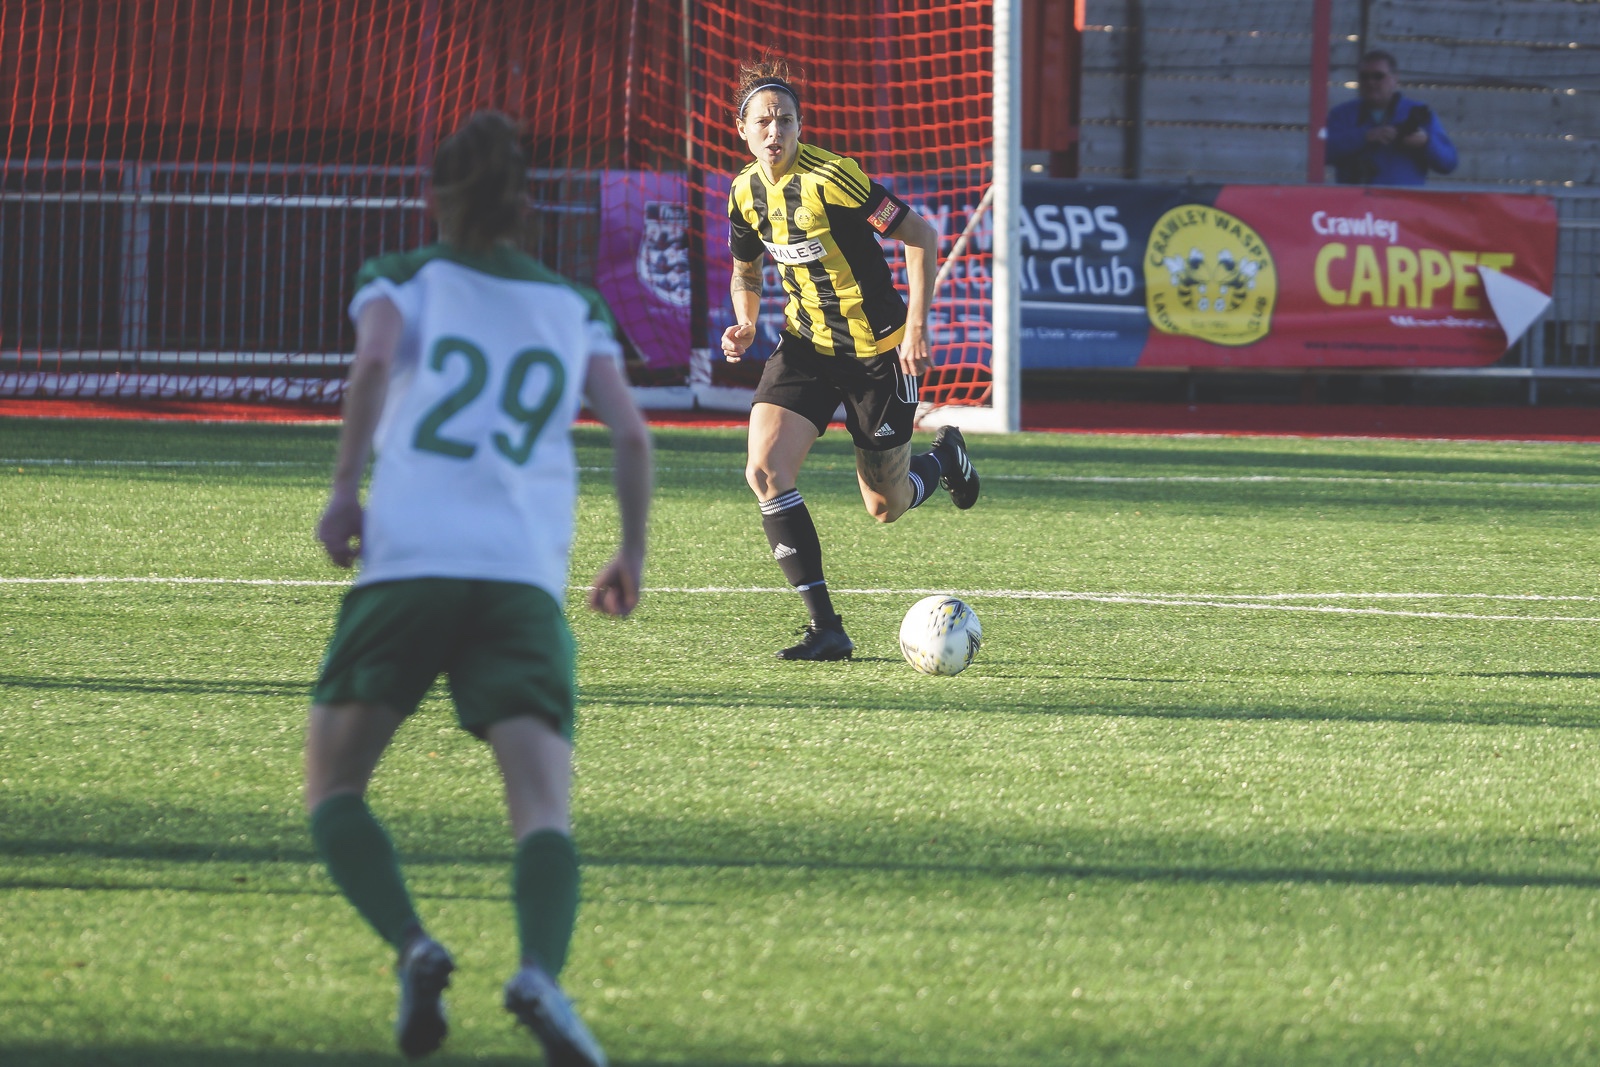 Crawley Wasps LFC (2) vs Chichester City LFC (0) on December 09, 2018 at Worthing FC, Woodside Road, Worthing, Worthing. Photo: Ben Davidson,